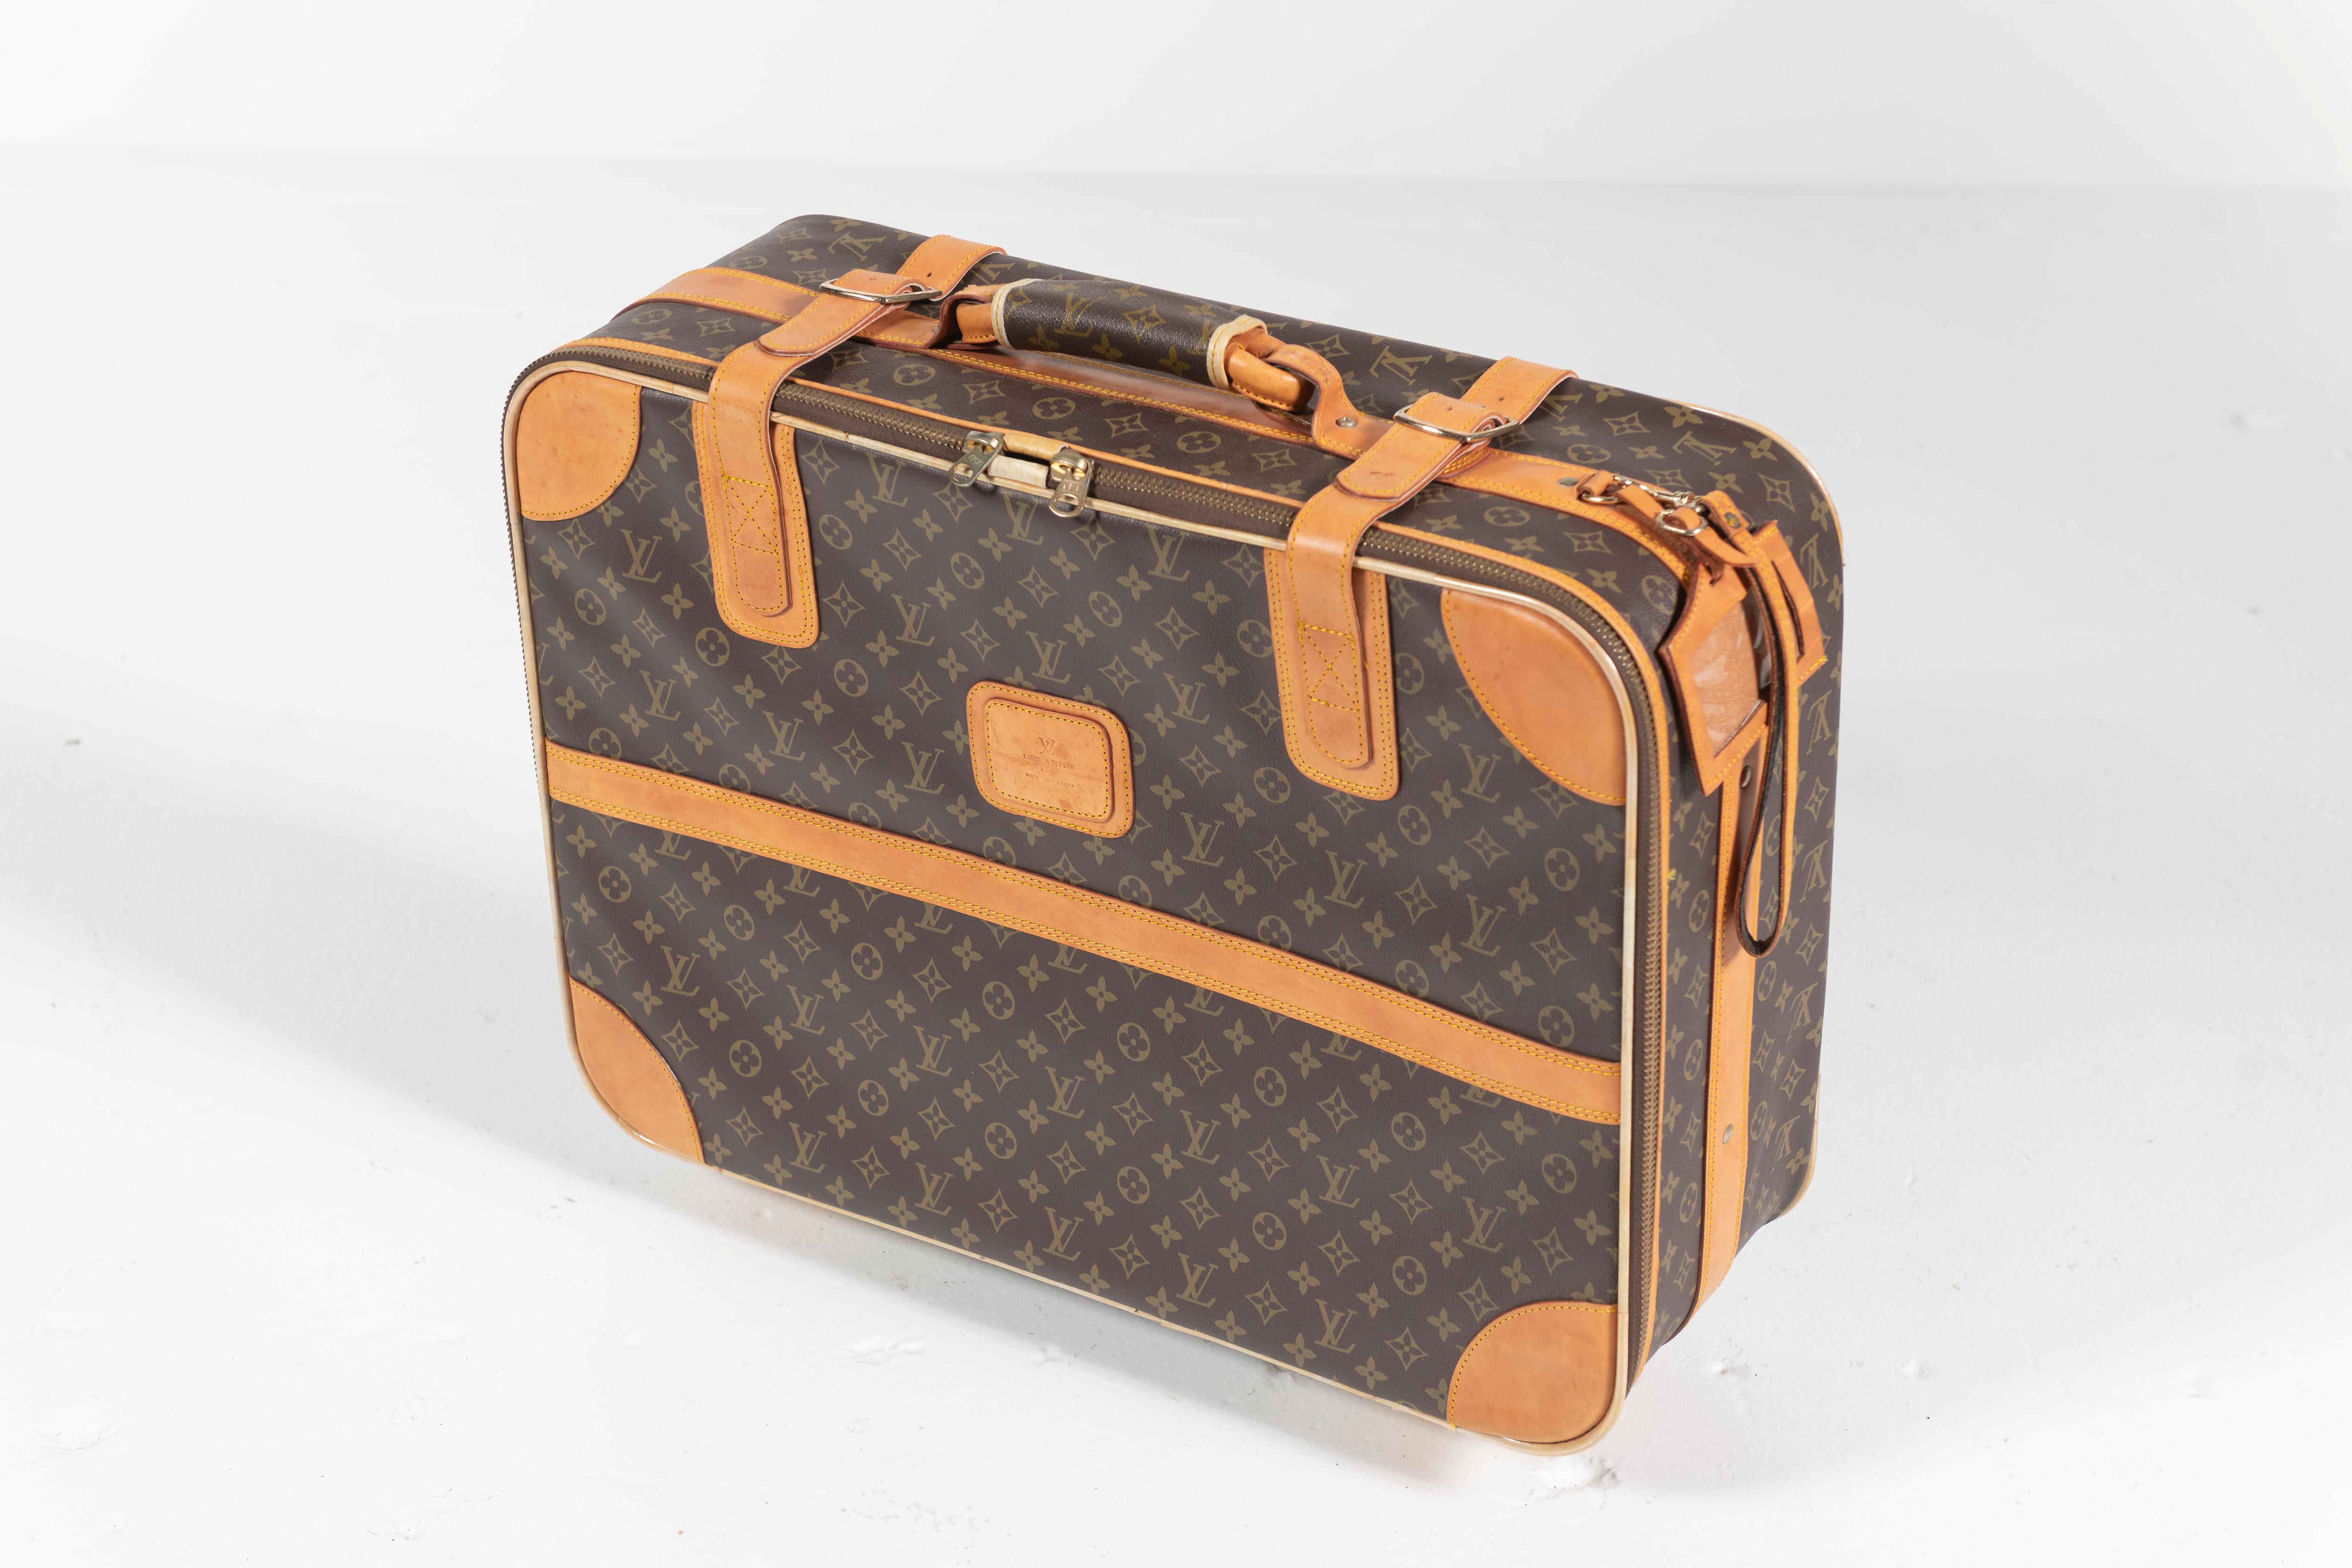 Vintage Louis Vuitton Suitcase, Monogrammed Coated Canvas, Small-Sized For Sale 1